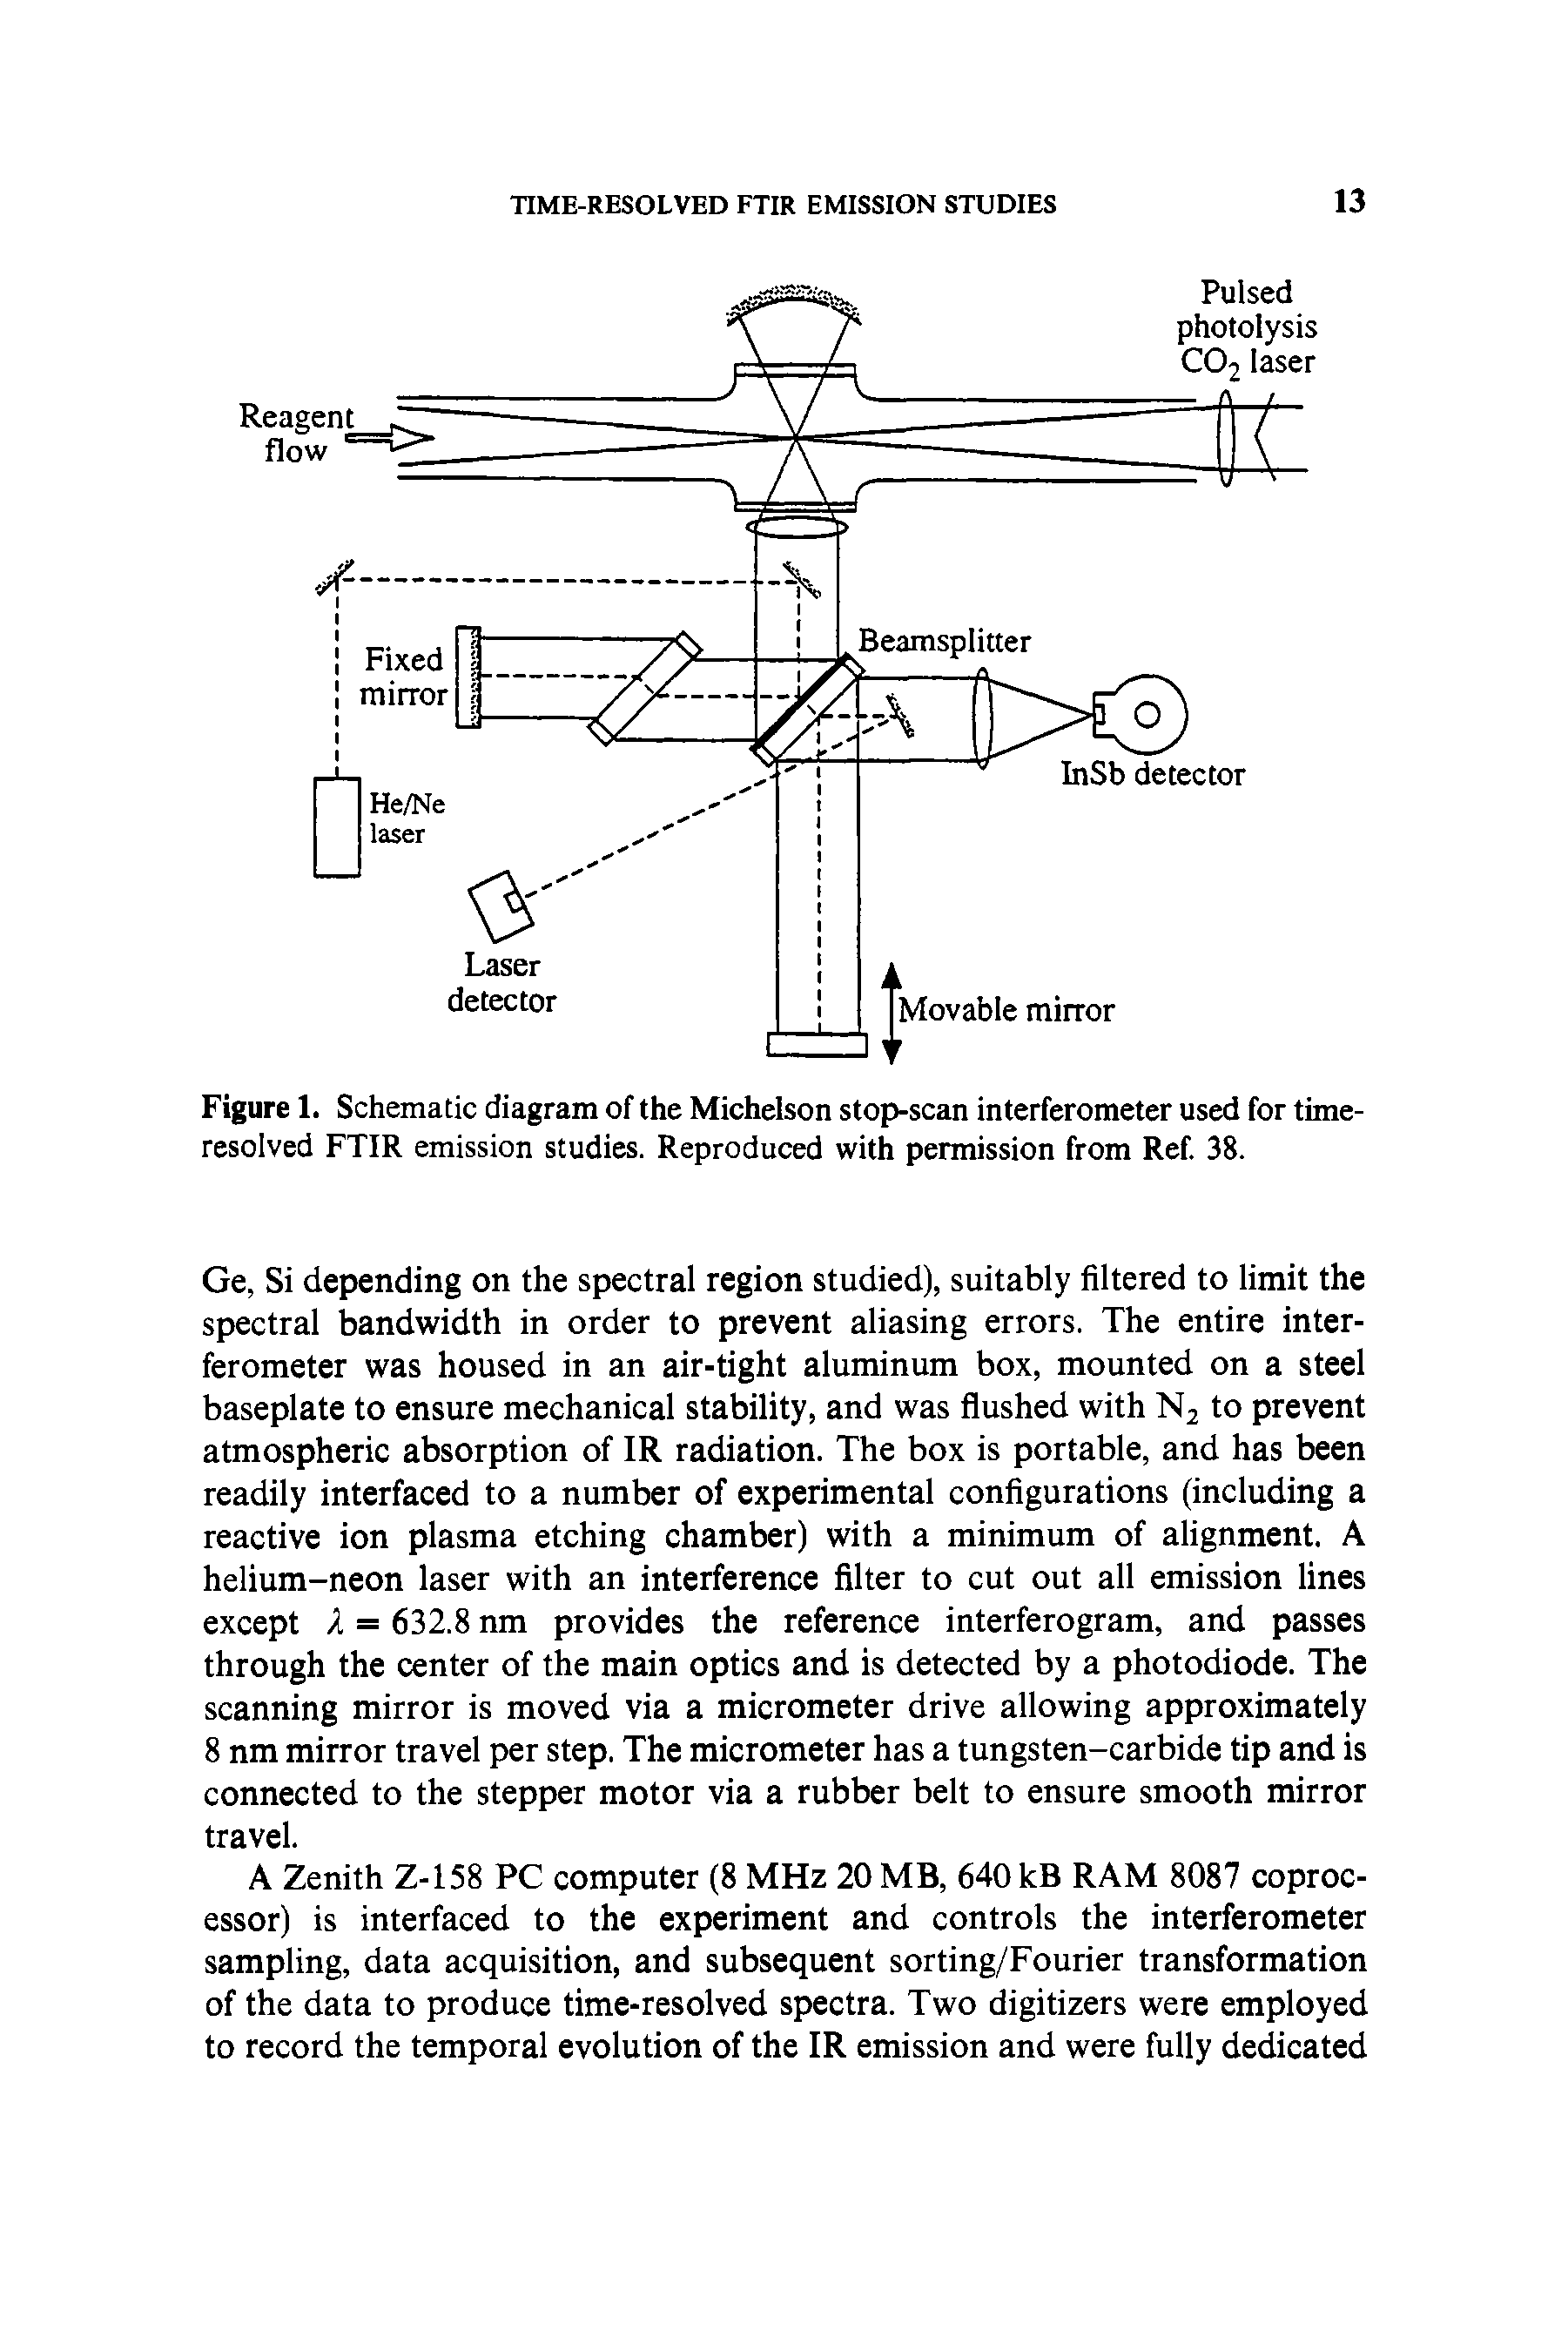 Figure 1. Schematic diagram of the Michelson stop-scan interferometer used for time-resolved FTIR emission studies. Reproduced with permission from Ref. 38.